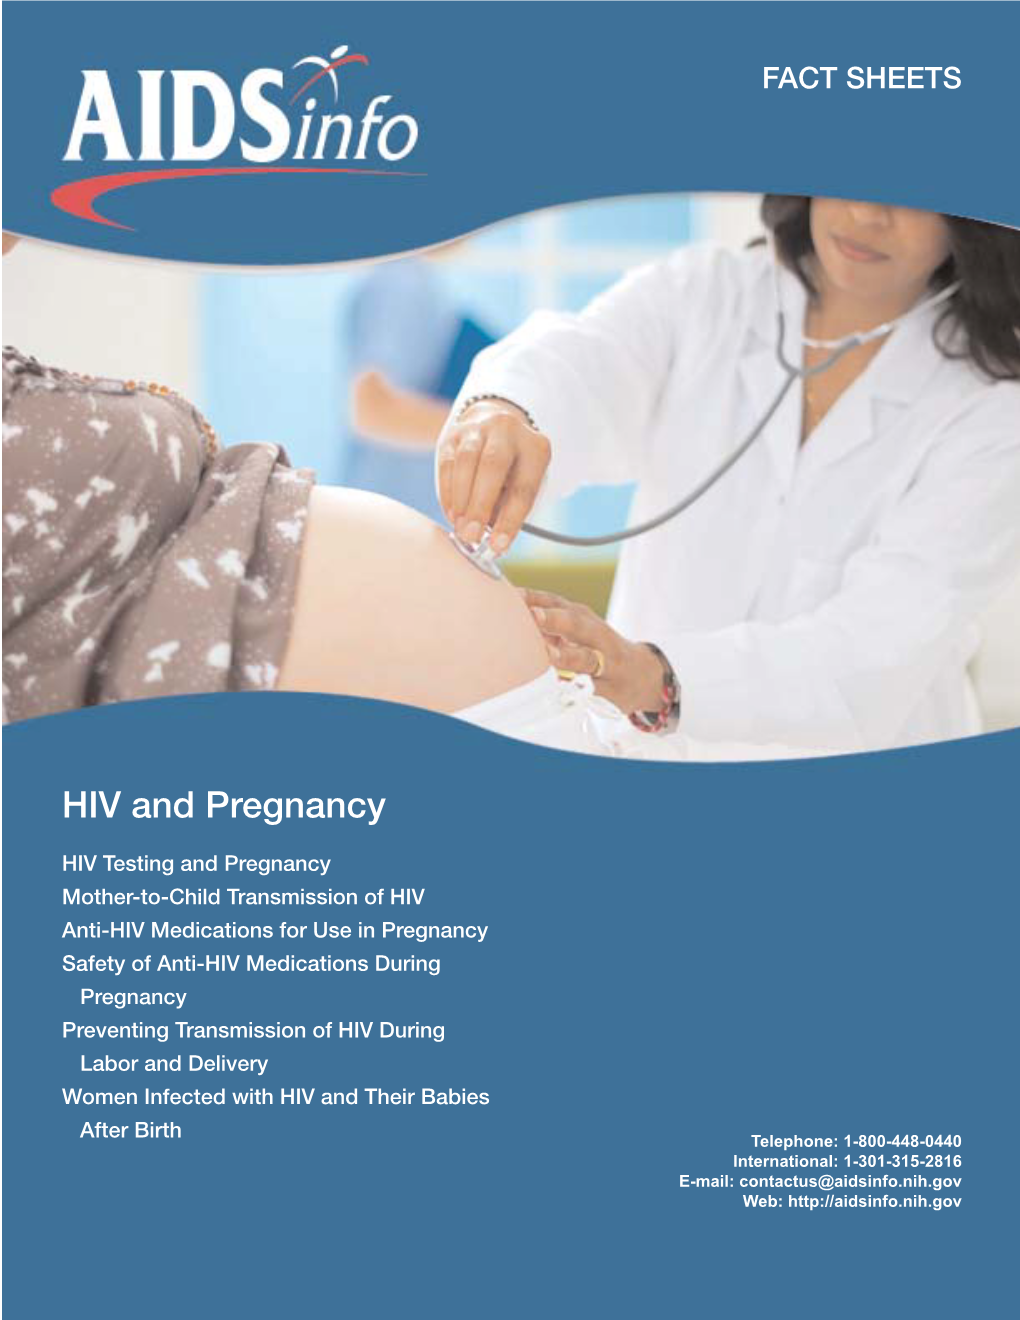 HIV and Pregnancy